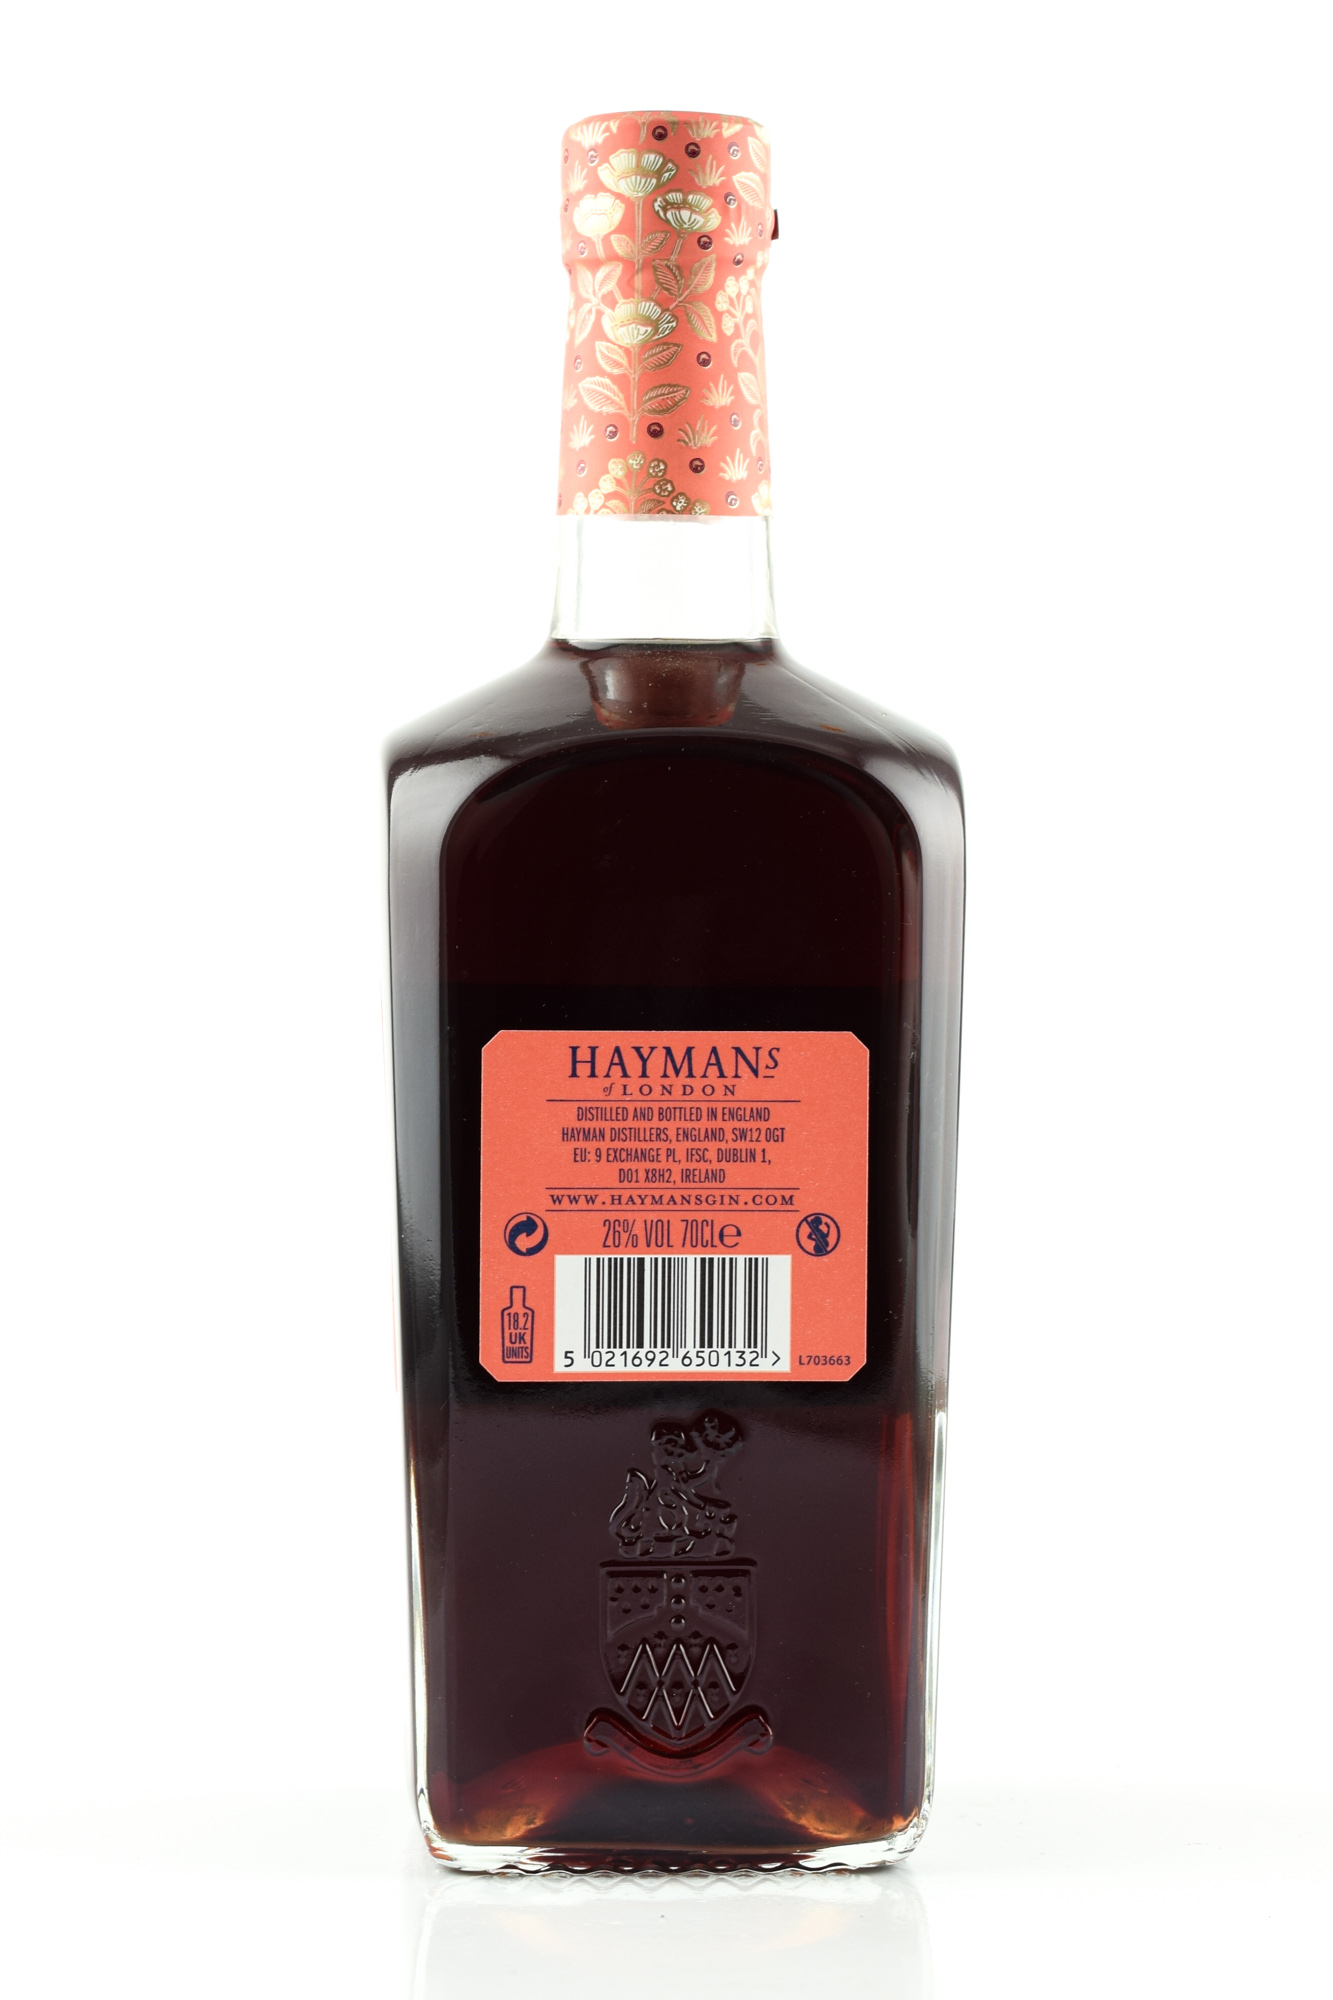 Hayman's Sloe Gin at Home of Malts >> explore now! | Home of Malts